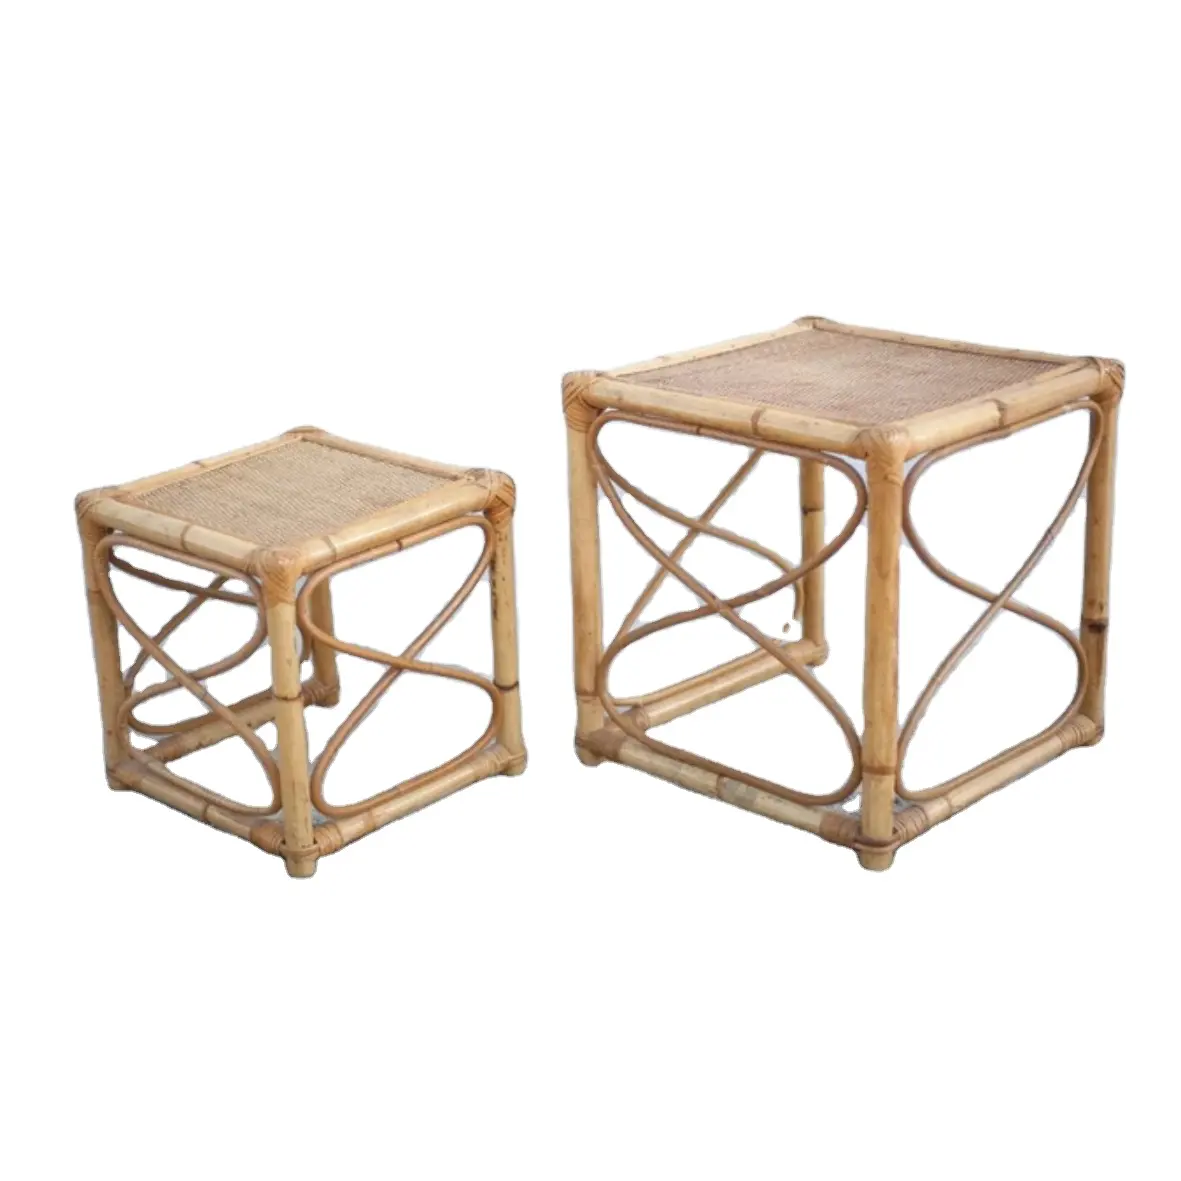 Two Size Living Room Furniture Round Coffee Side Table Fancy Hot Sell Bamboo New Design Luxury Natural Finished Simple Stool